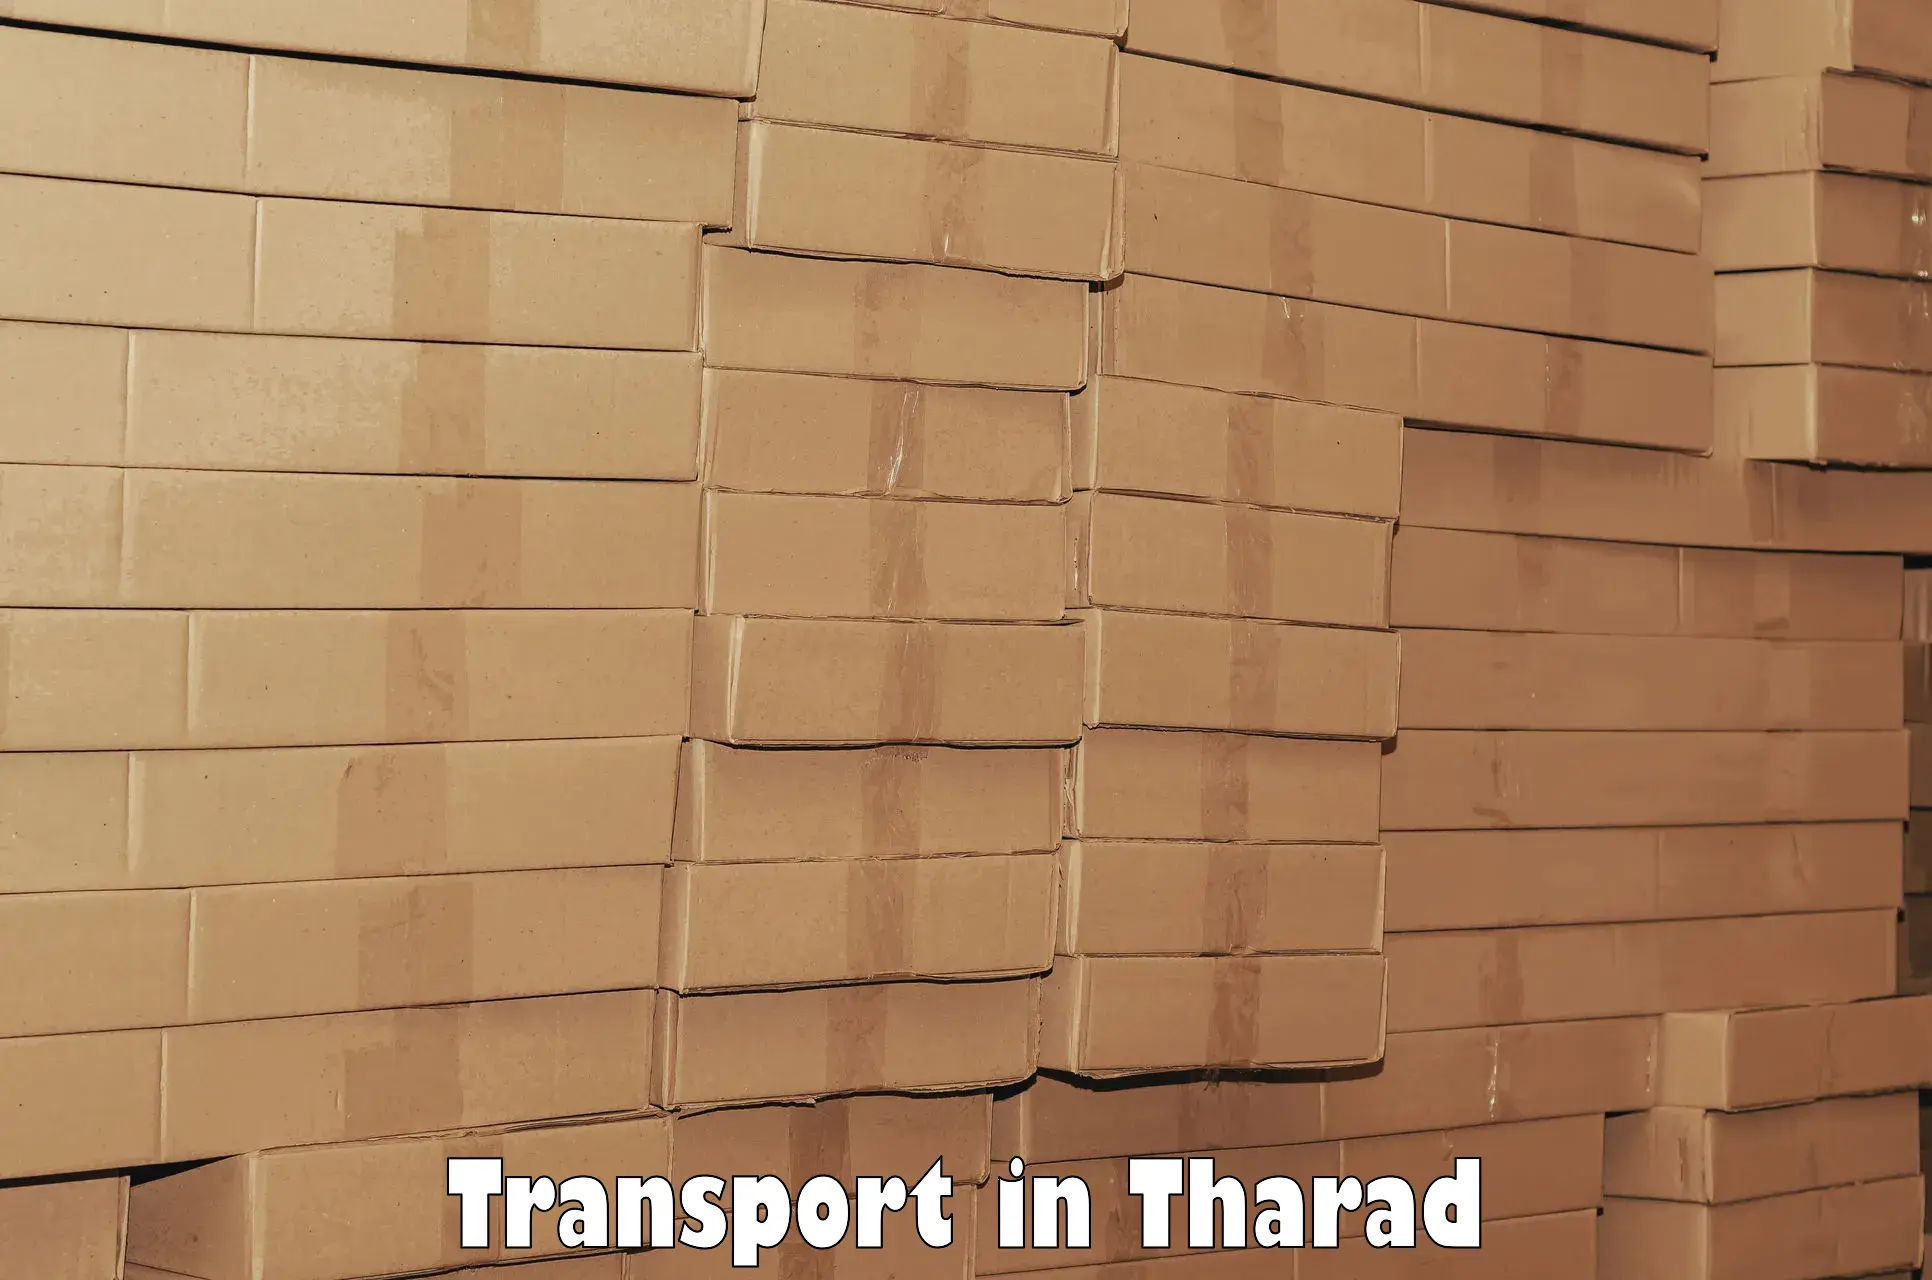 Container transport service in Tharad